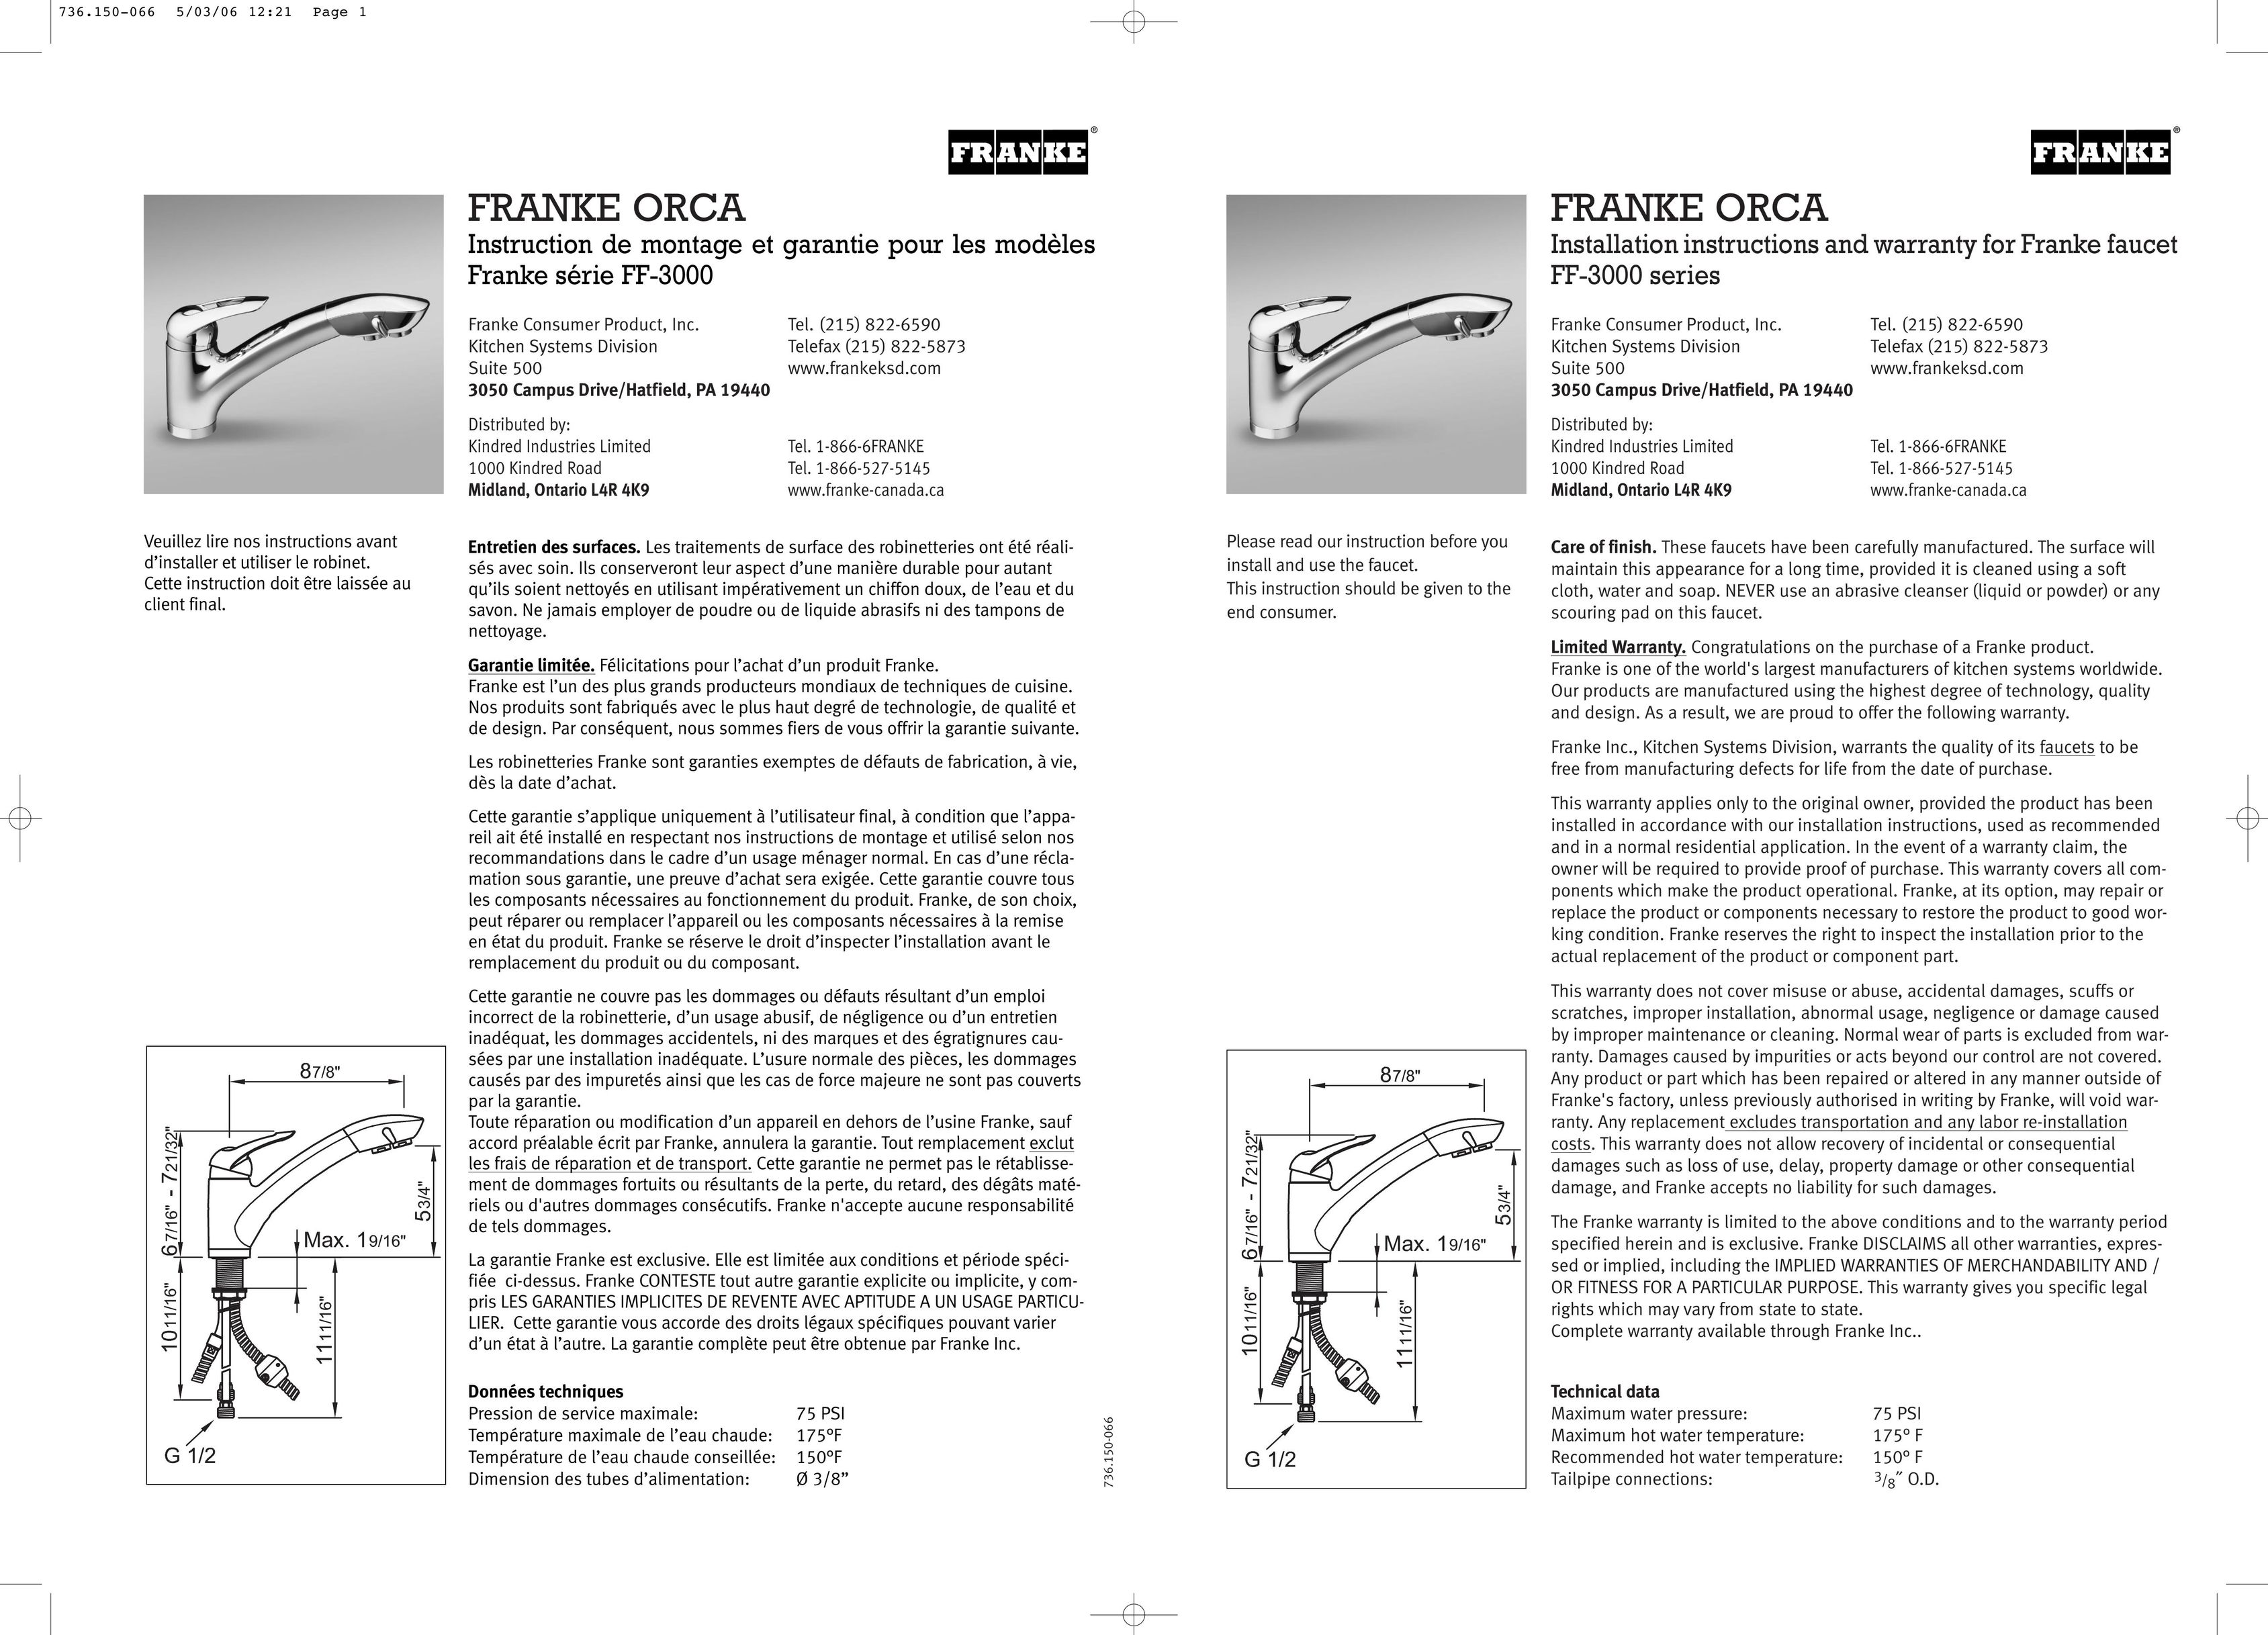 Franke Consumer Products FF-3000 Plumbing Product User Manual